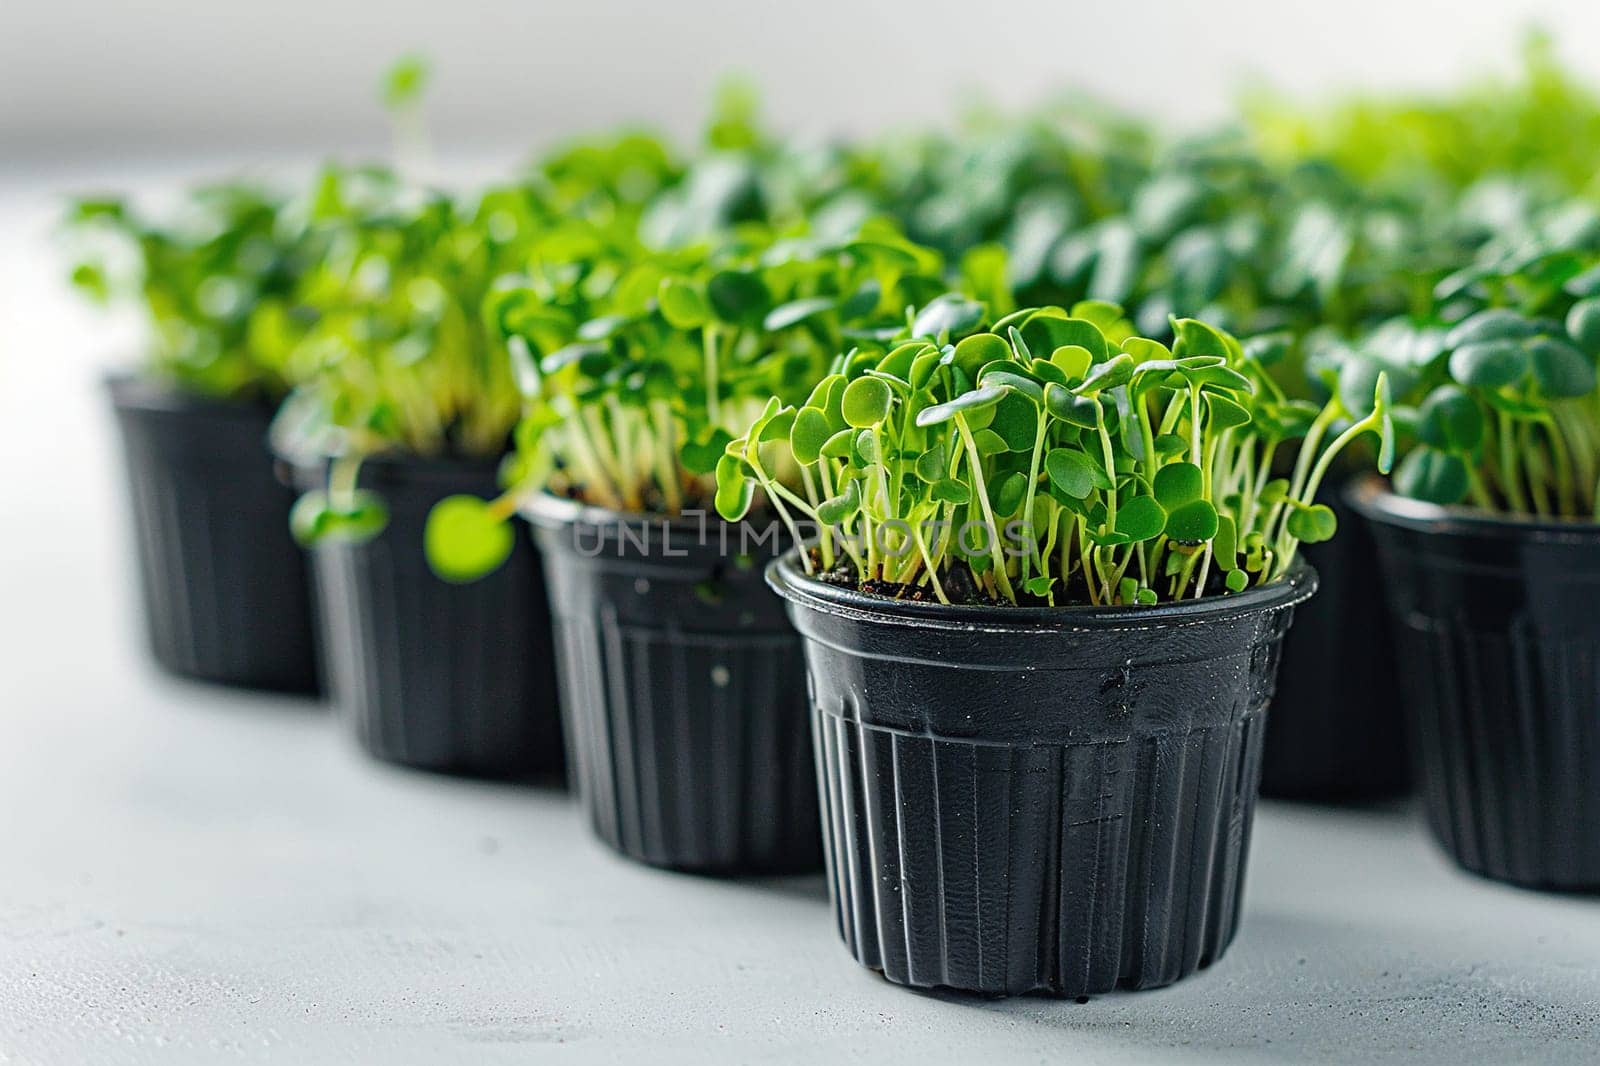 Black pots with lush microgreens on a white background. Eco vegan healthy lifestyle bio banner.